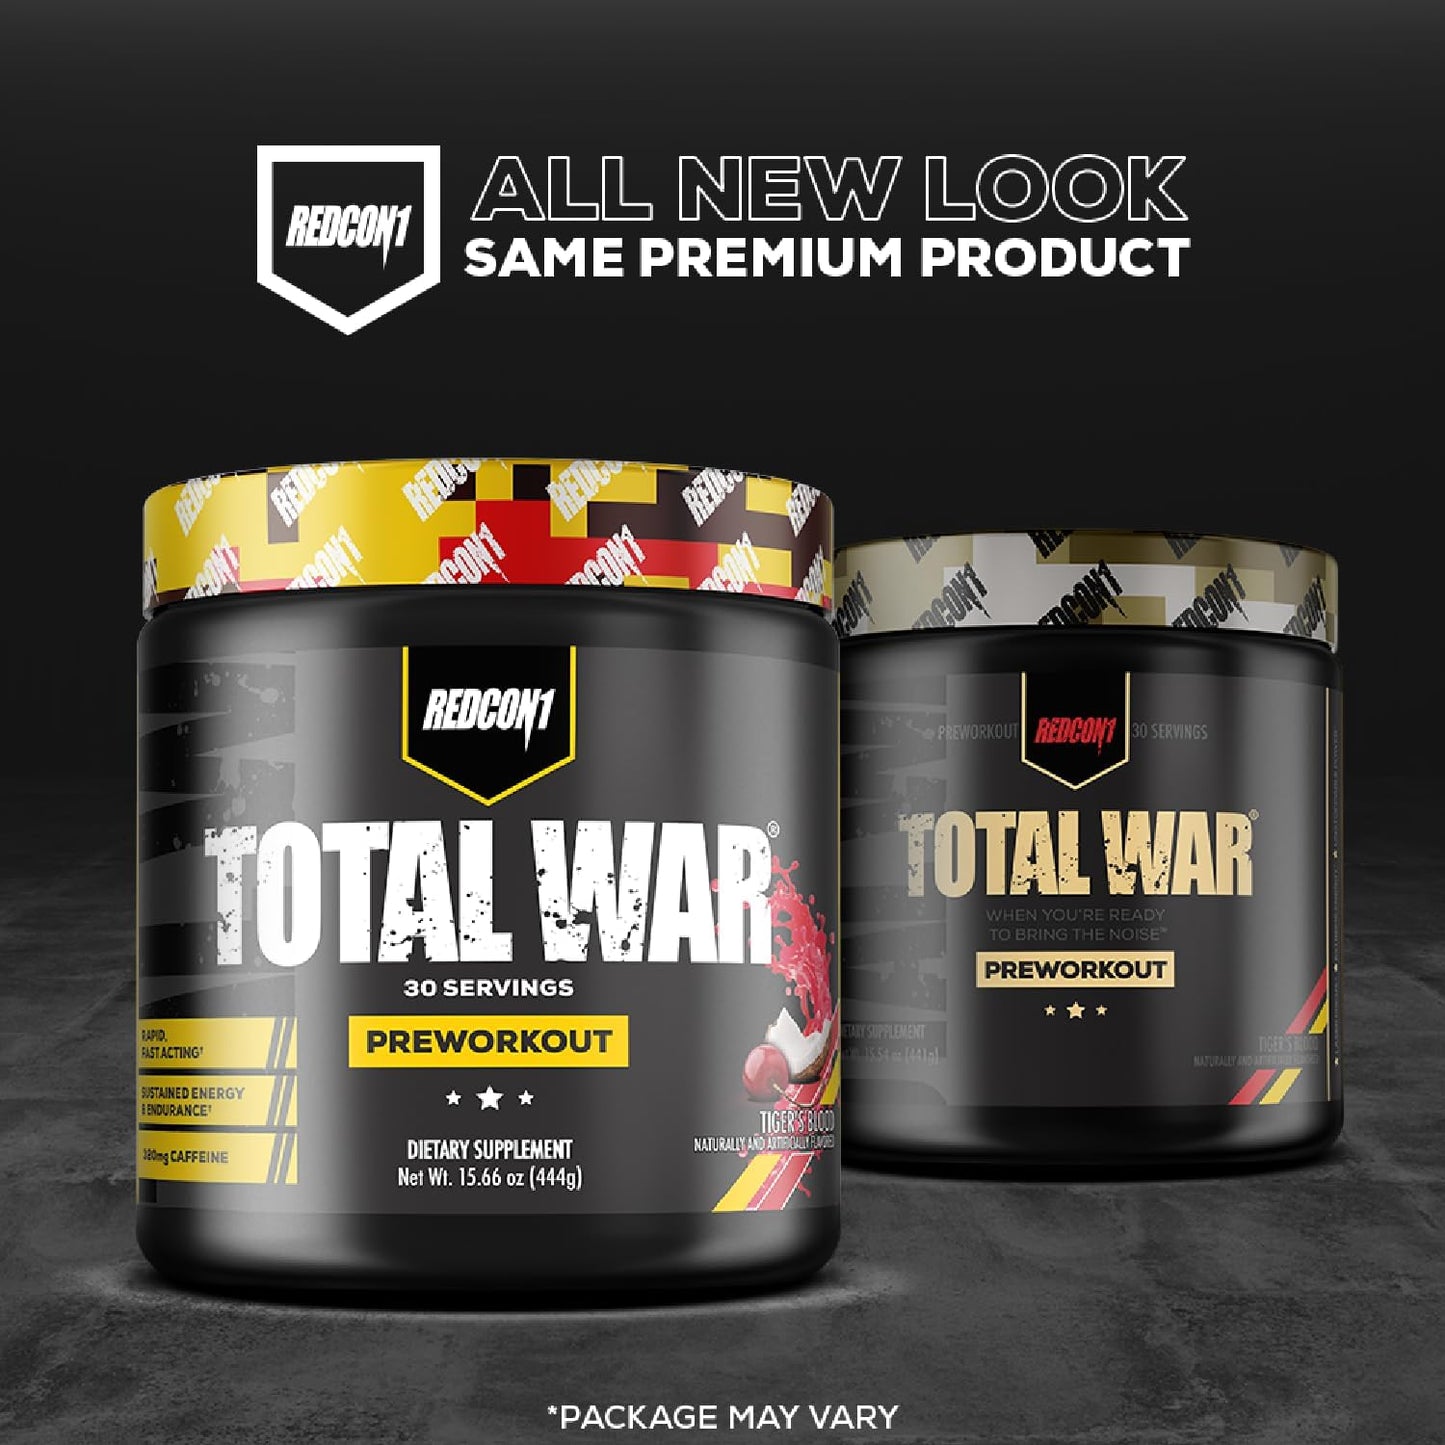 Total War Pre Workout - L Citrulline, Malic Acid, Green Tea Leaf Extract for Pump Boosting Pre Workout for Women & Men - 3.2G Beta Alanine to Reduce Exhaustion, Watermelon 30 Servings